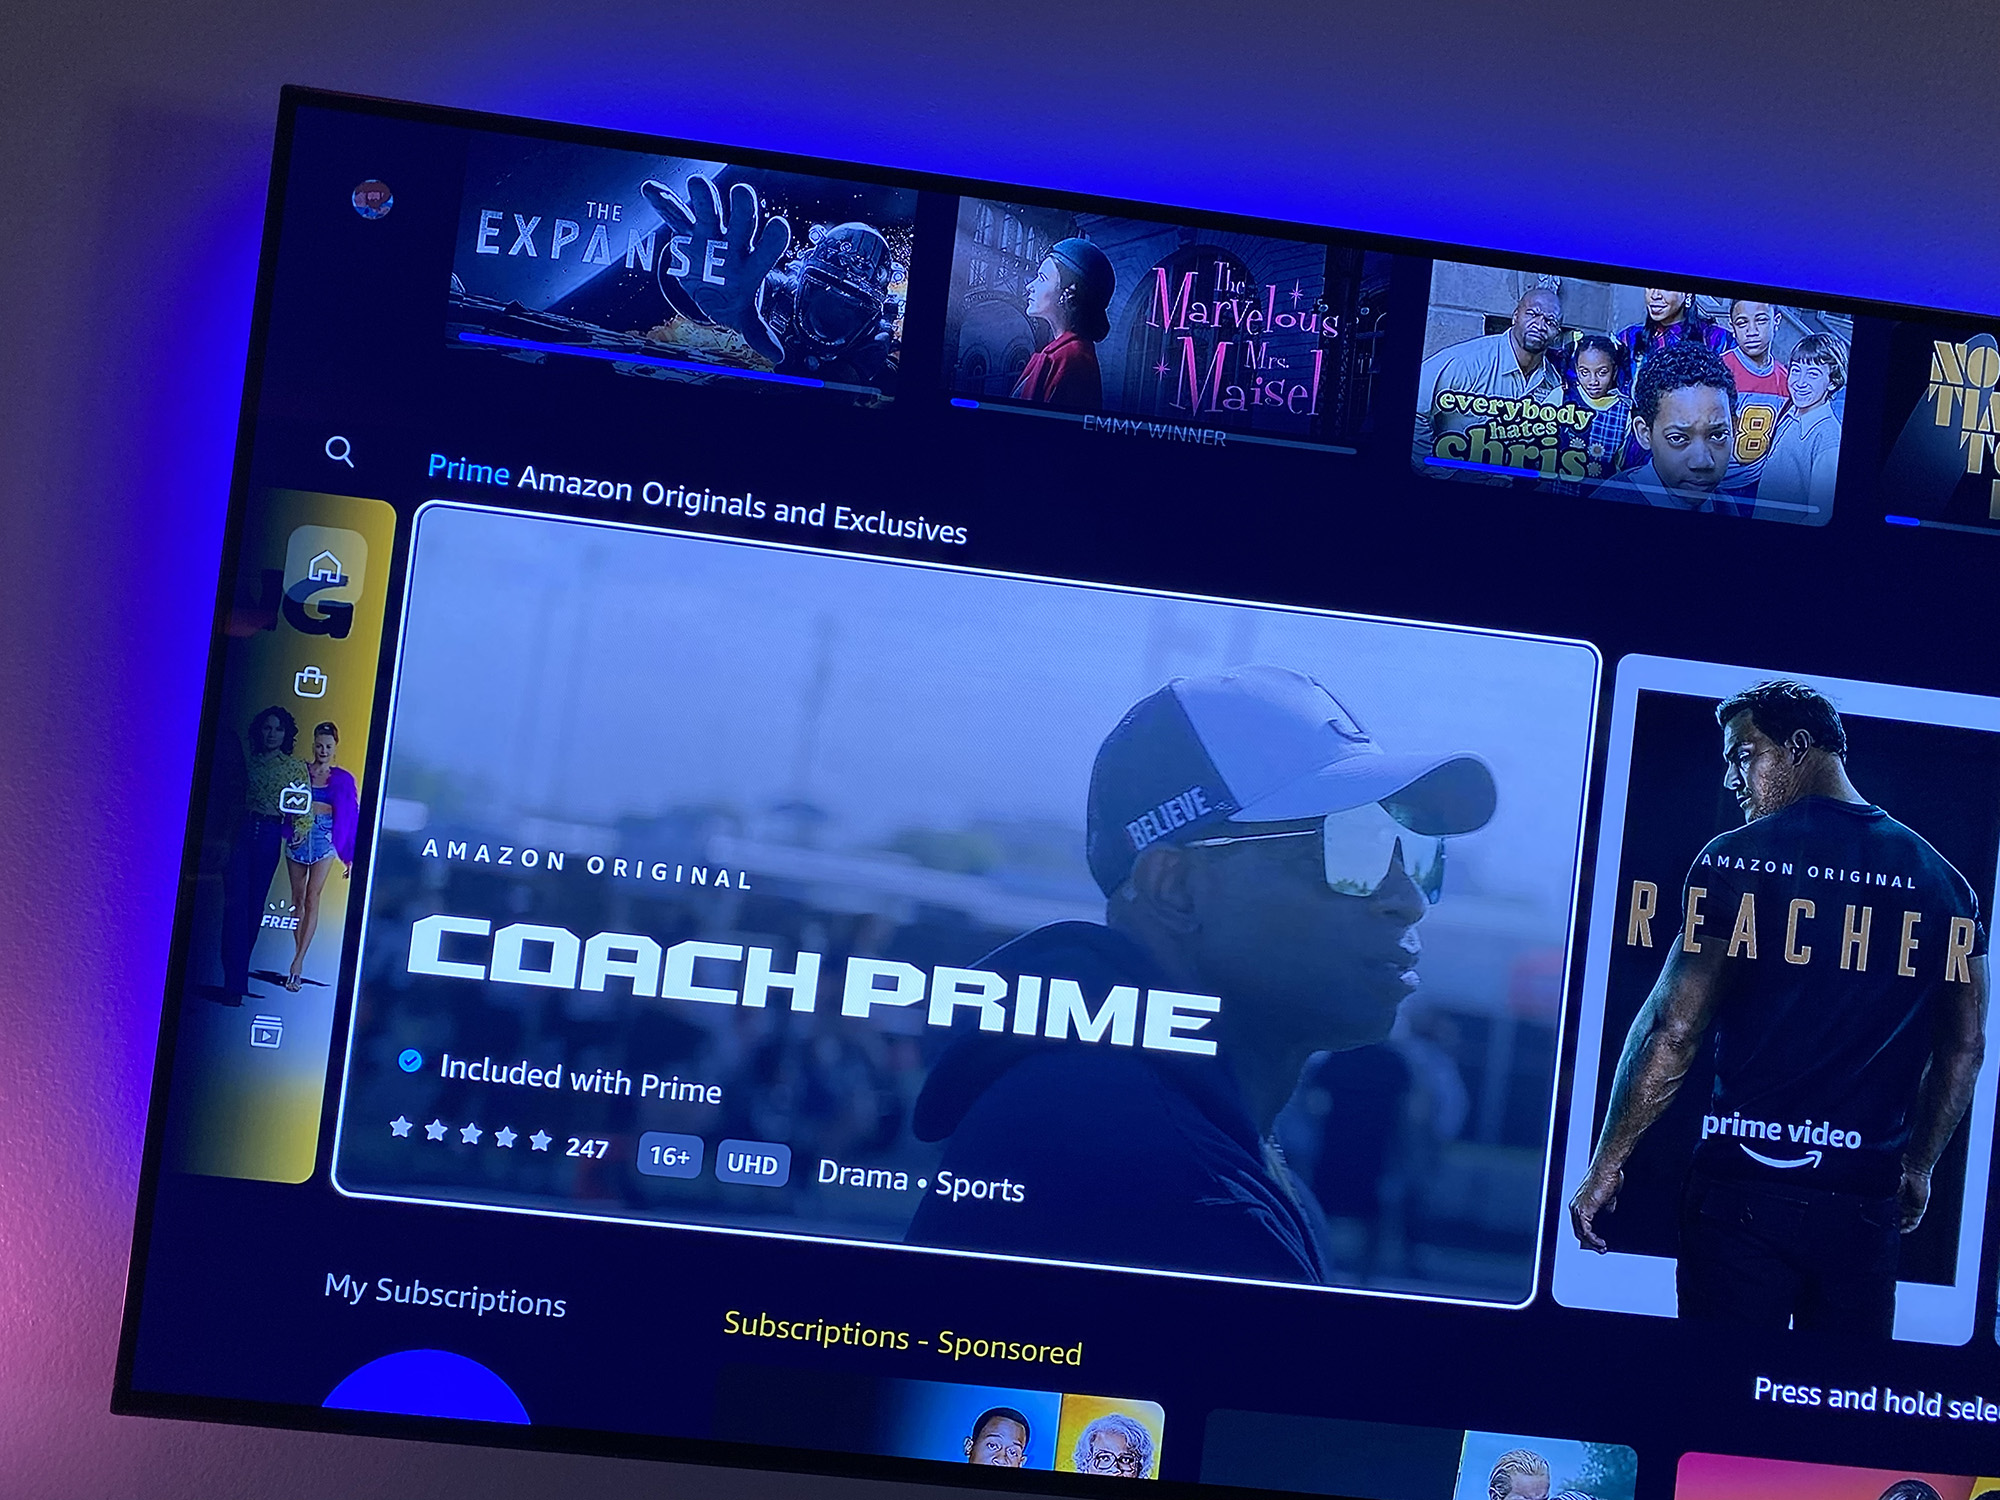 Amazon Prime Video on a TV.